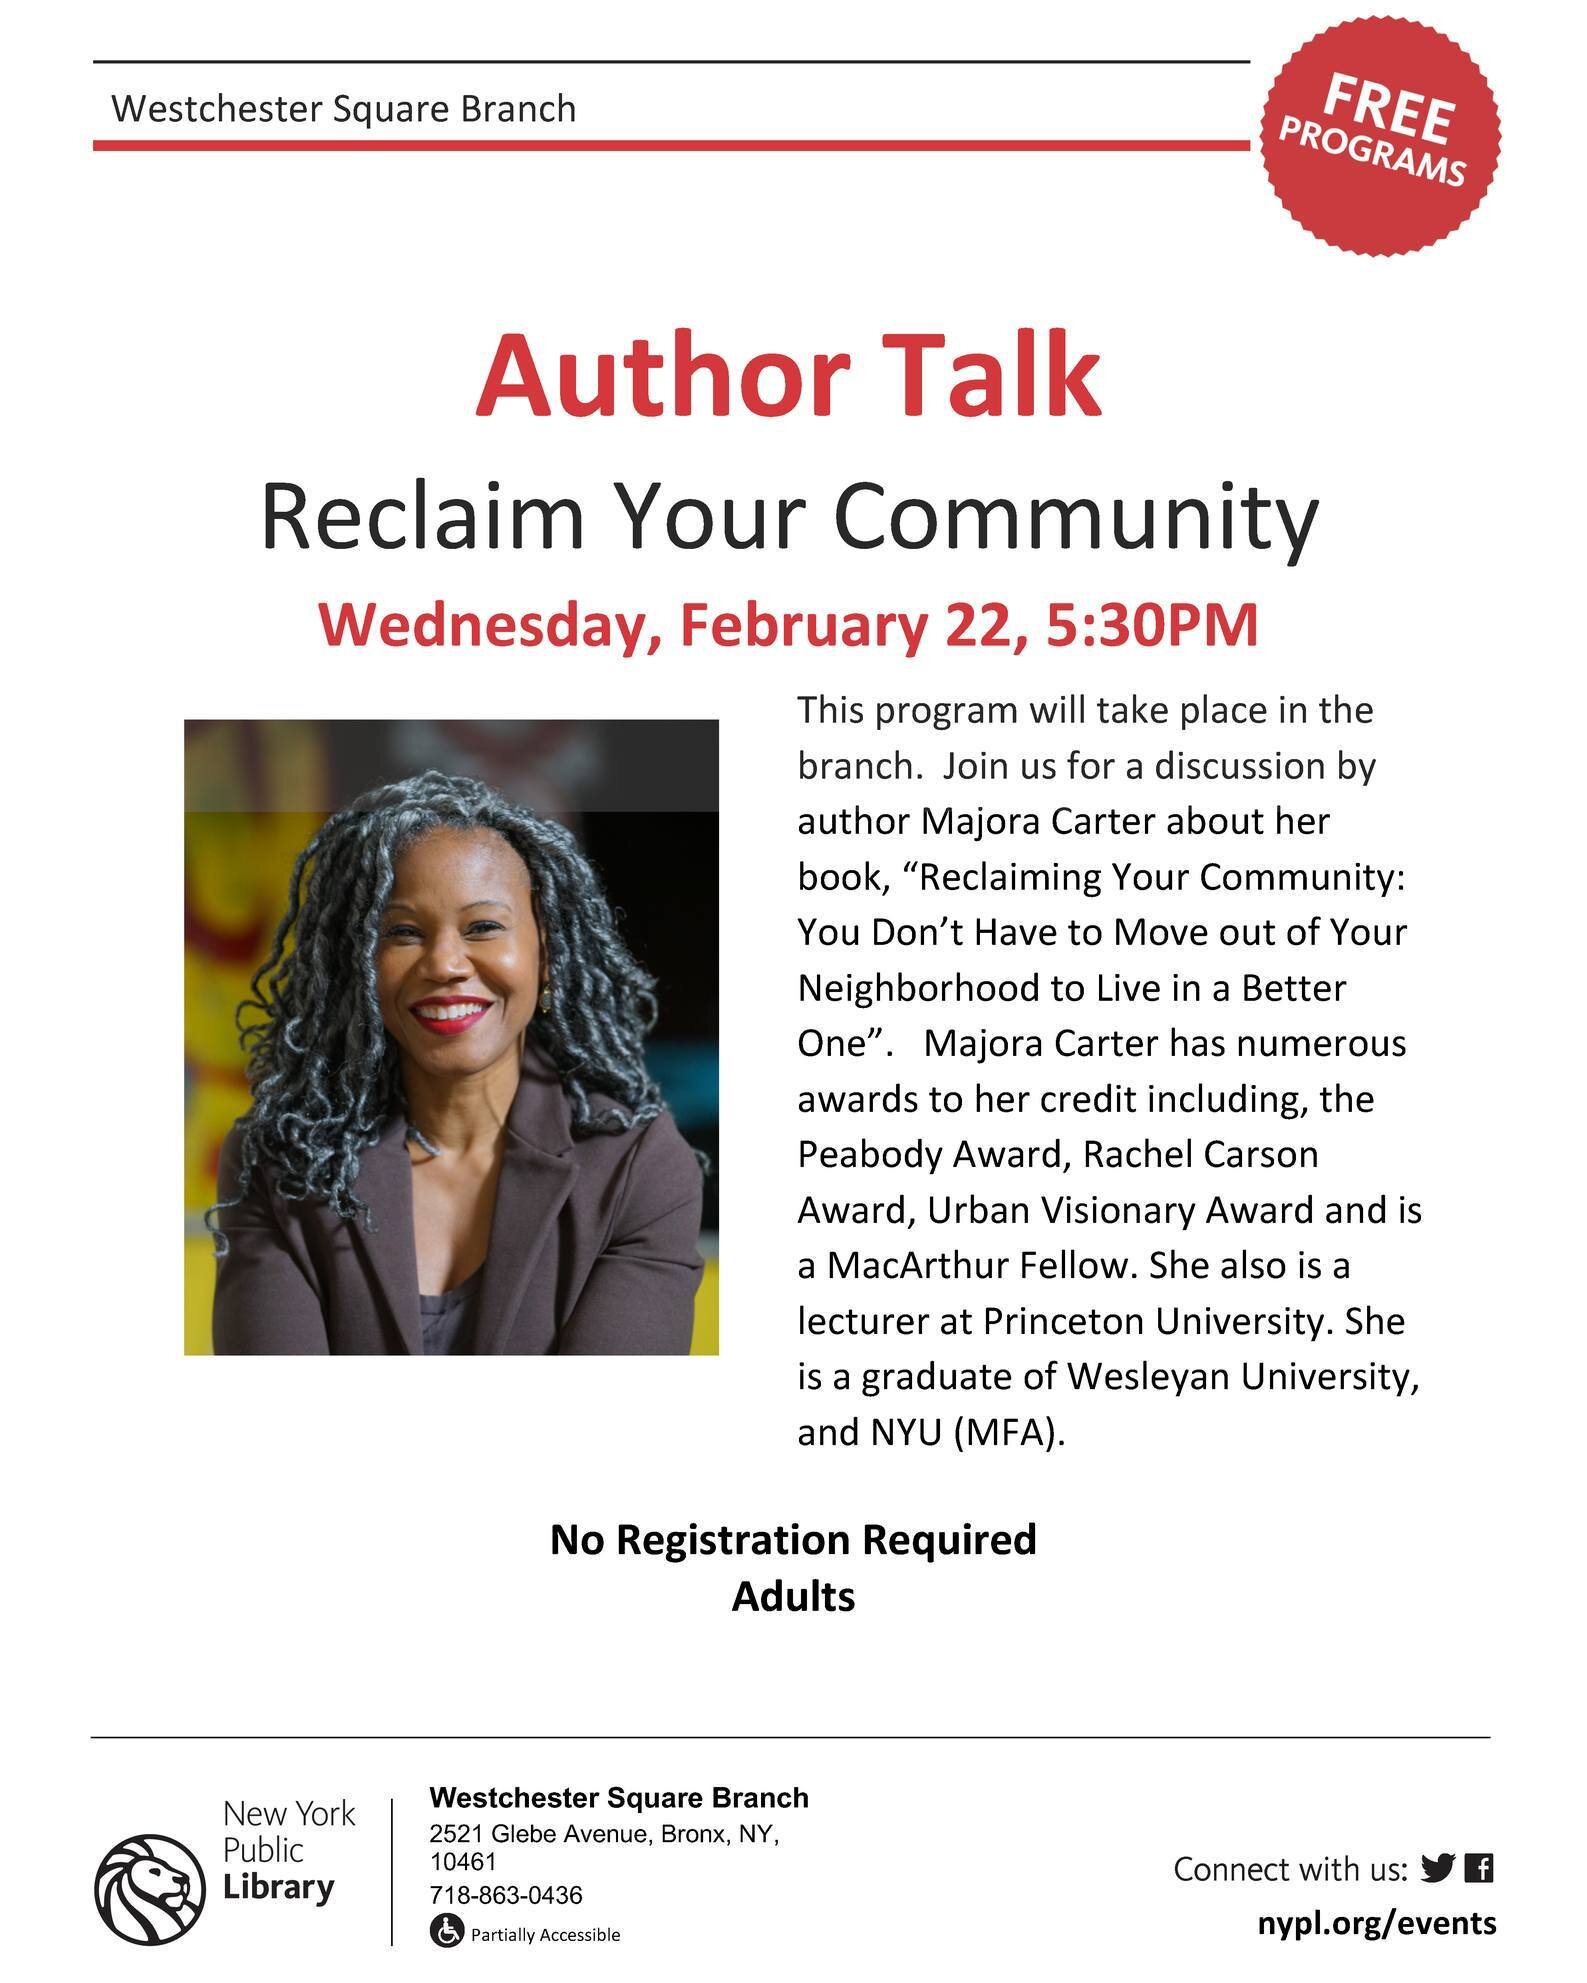 Visit the NYPL Westchester Square Branch on Wednesday, February 22nd at 5:30PM for an Author Talk. Event is free and registration is not required. This discussion is geared towards adults. Westchester Square Branch Library